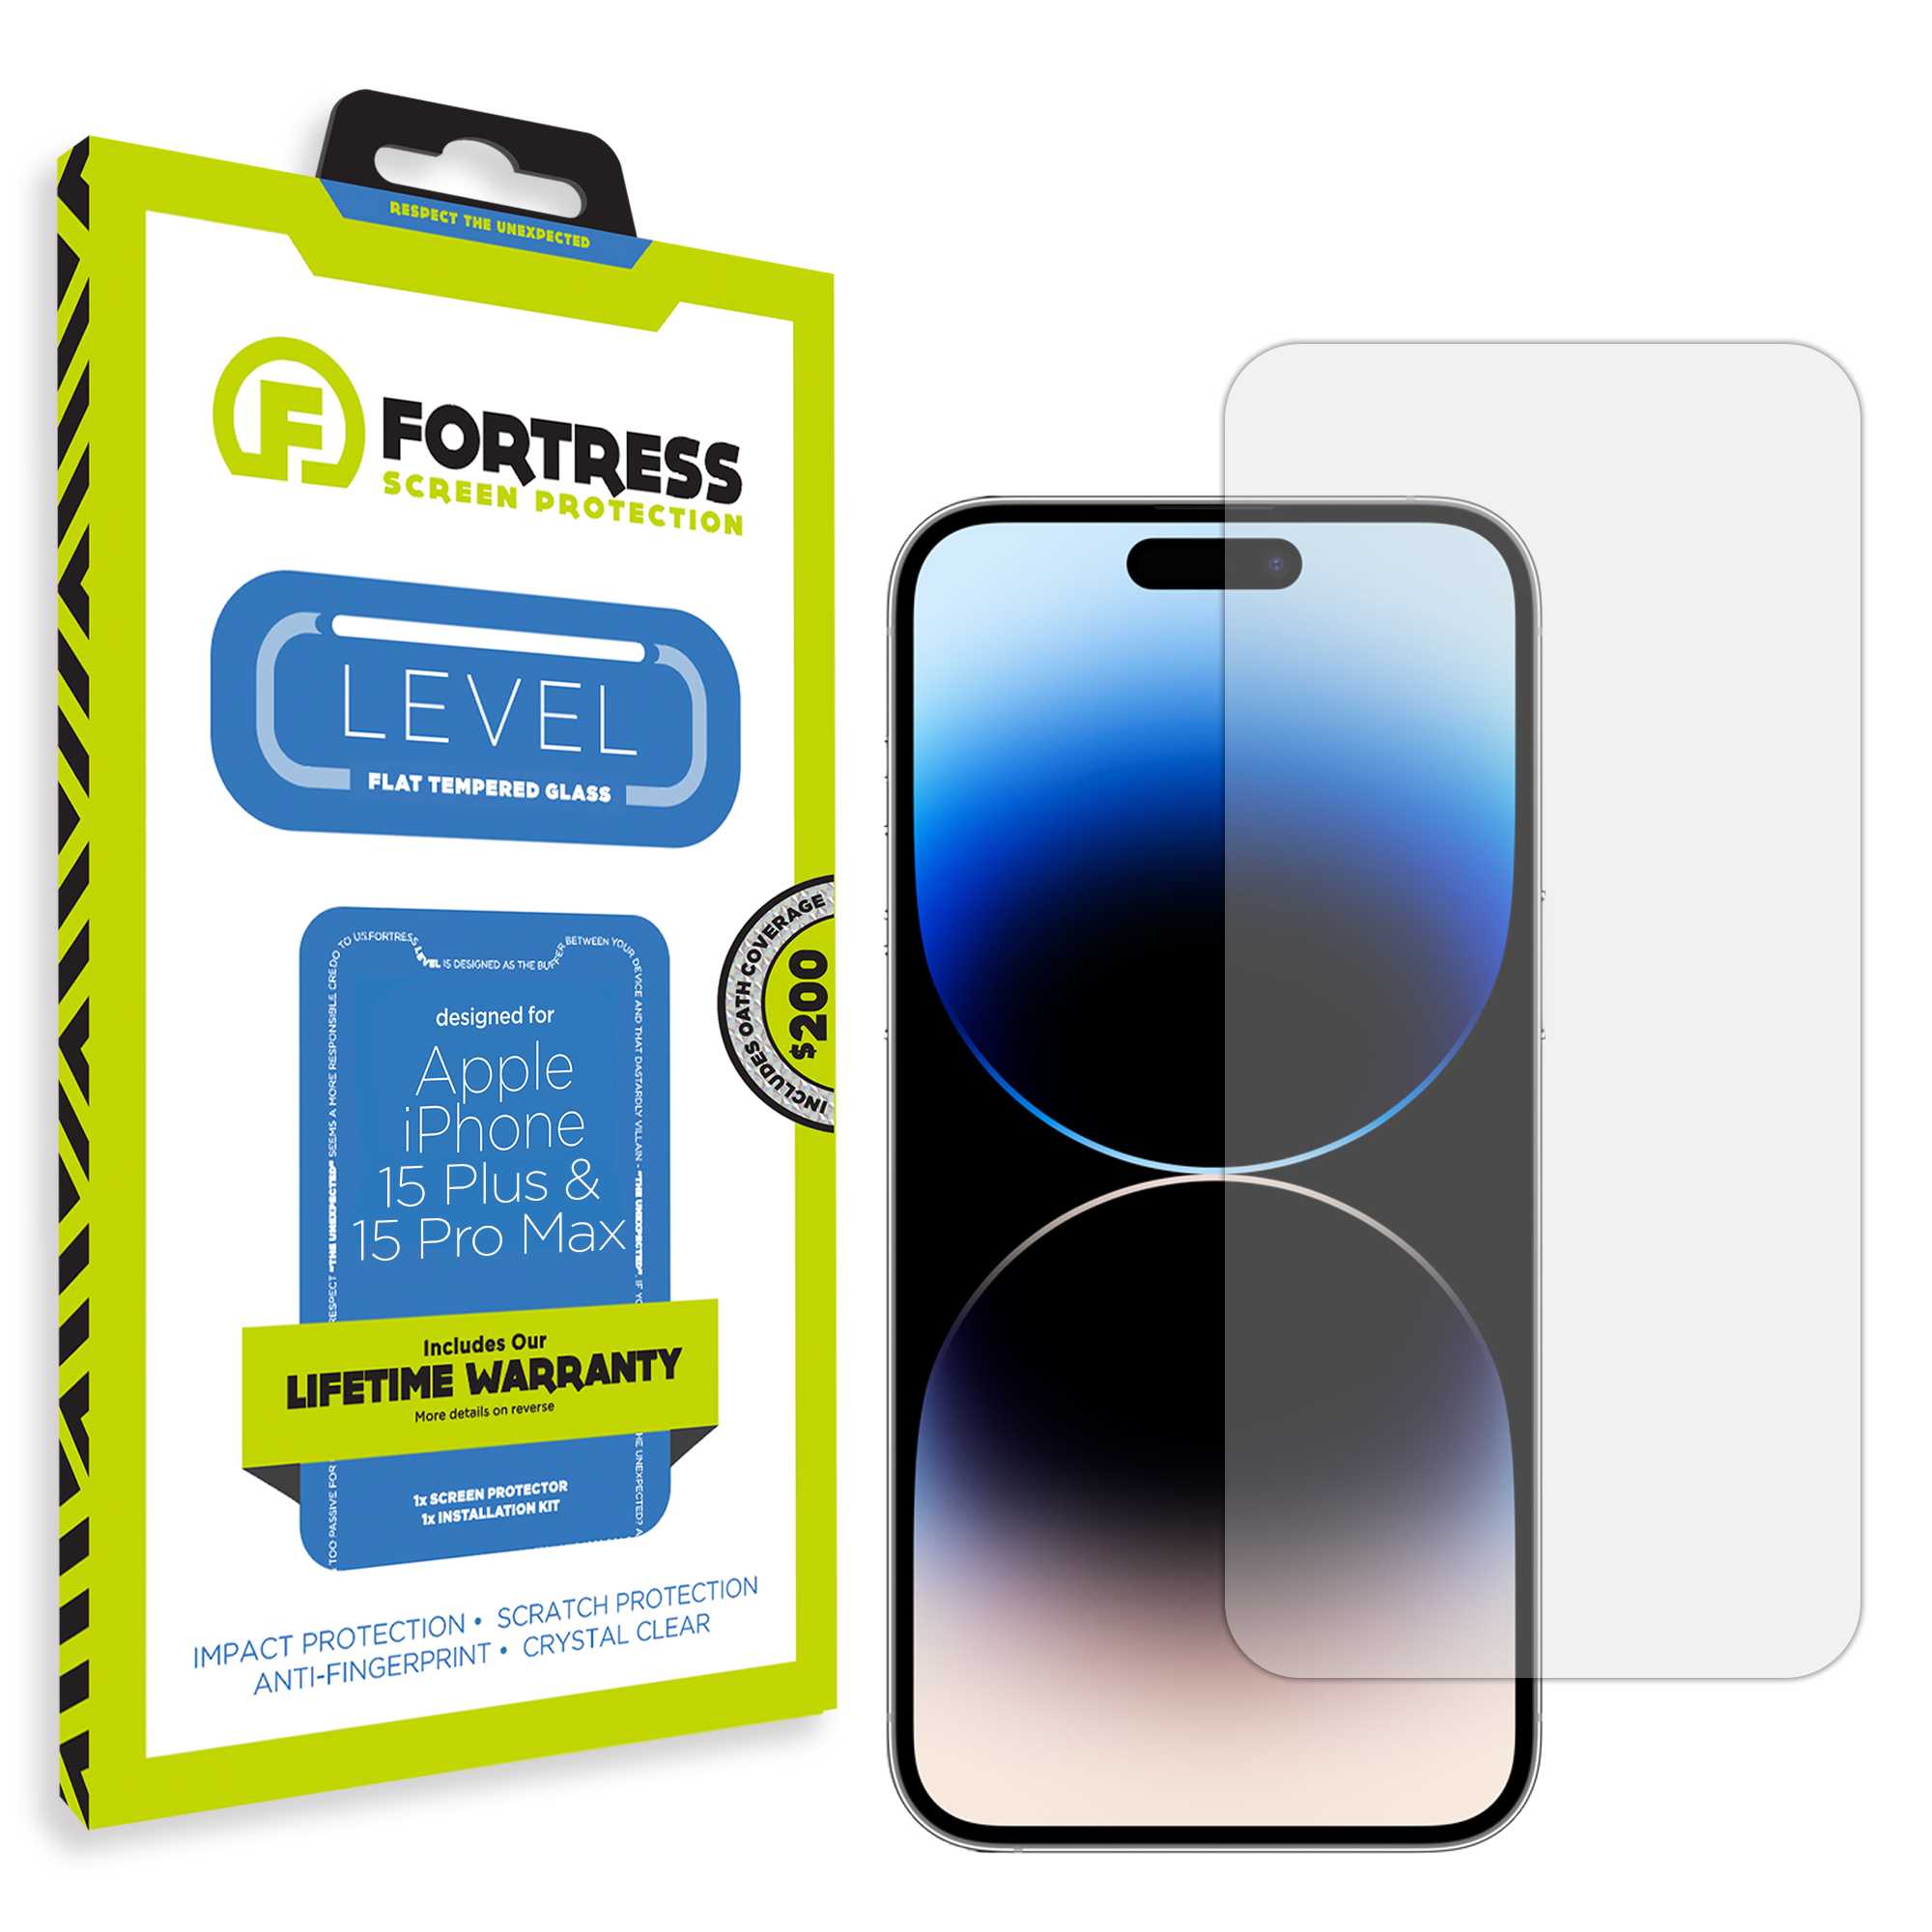 Fortress iPhone 15 Pro Max Screen Protector $200Coverage Scooch Screen Protector